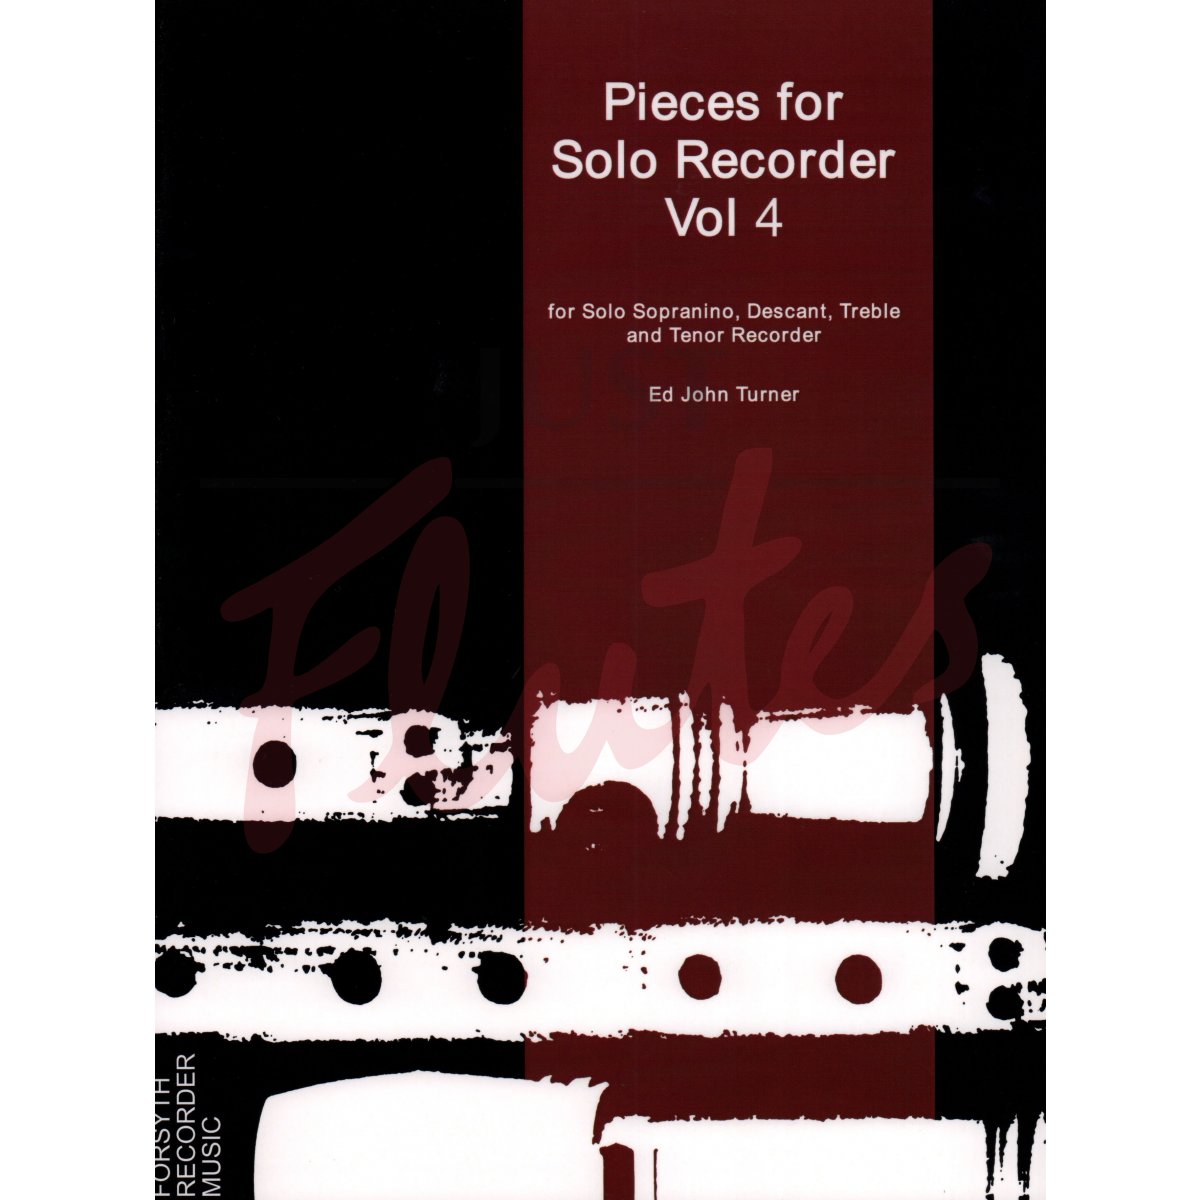 Pieces for Solo Recorder, Volume 4